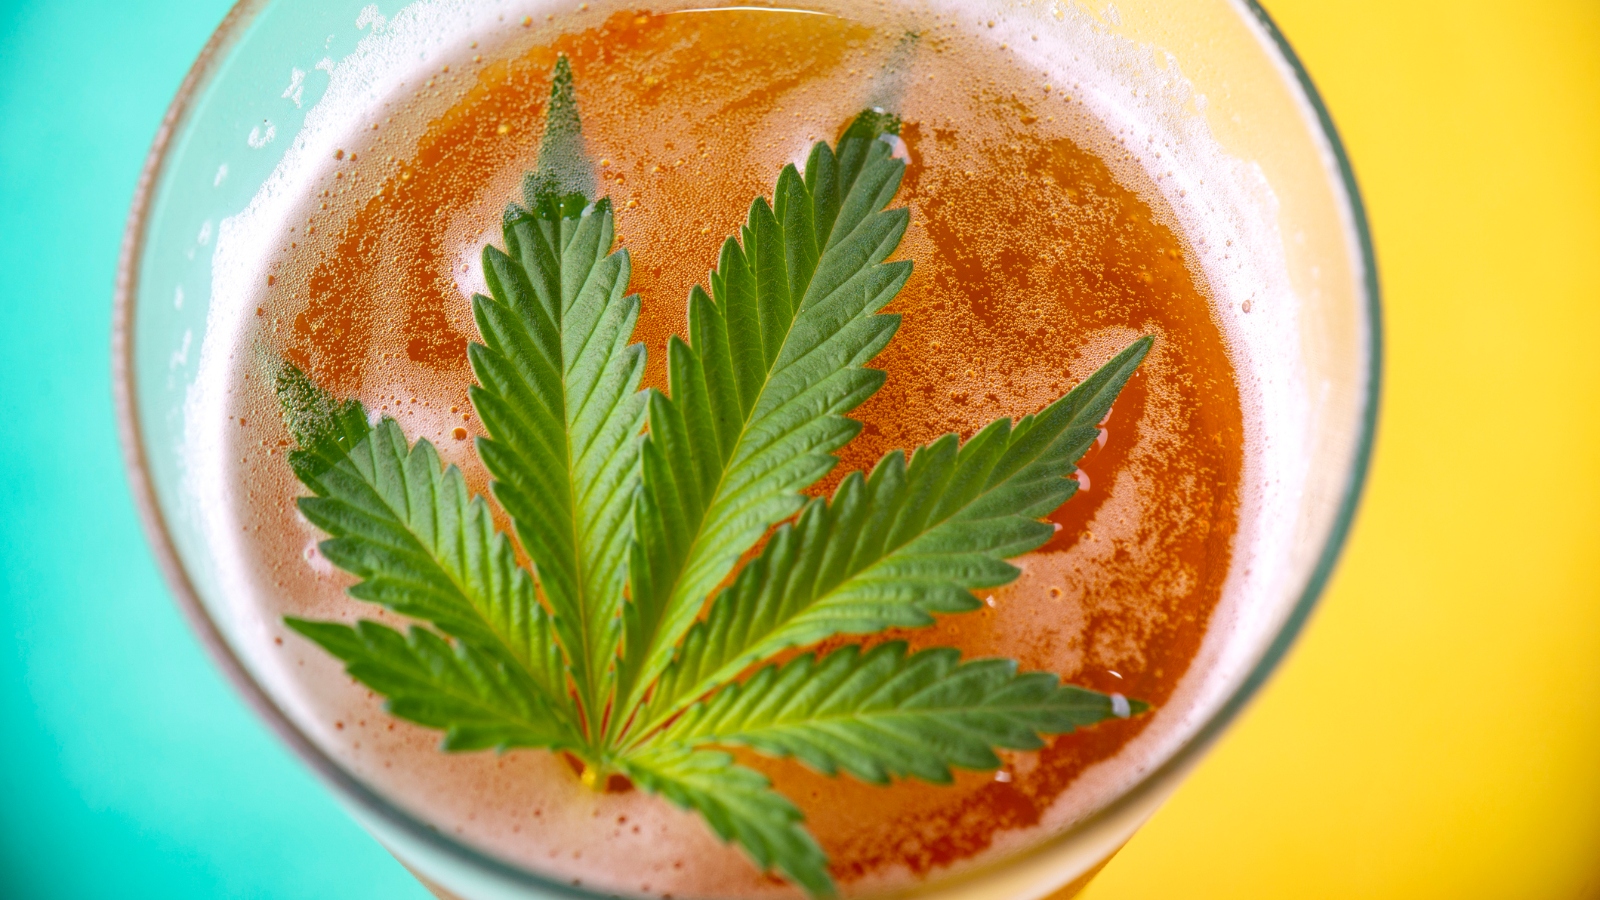 Marijuana leaf sitting on a cold glass of beer